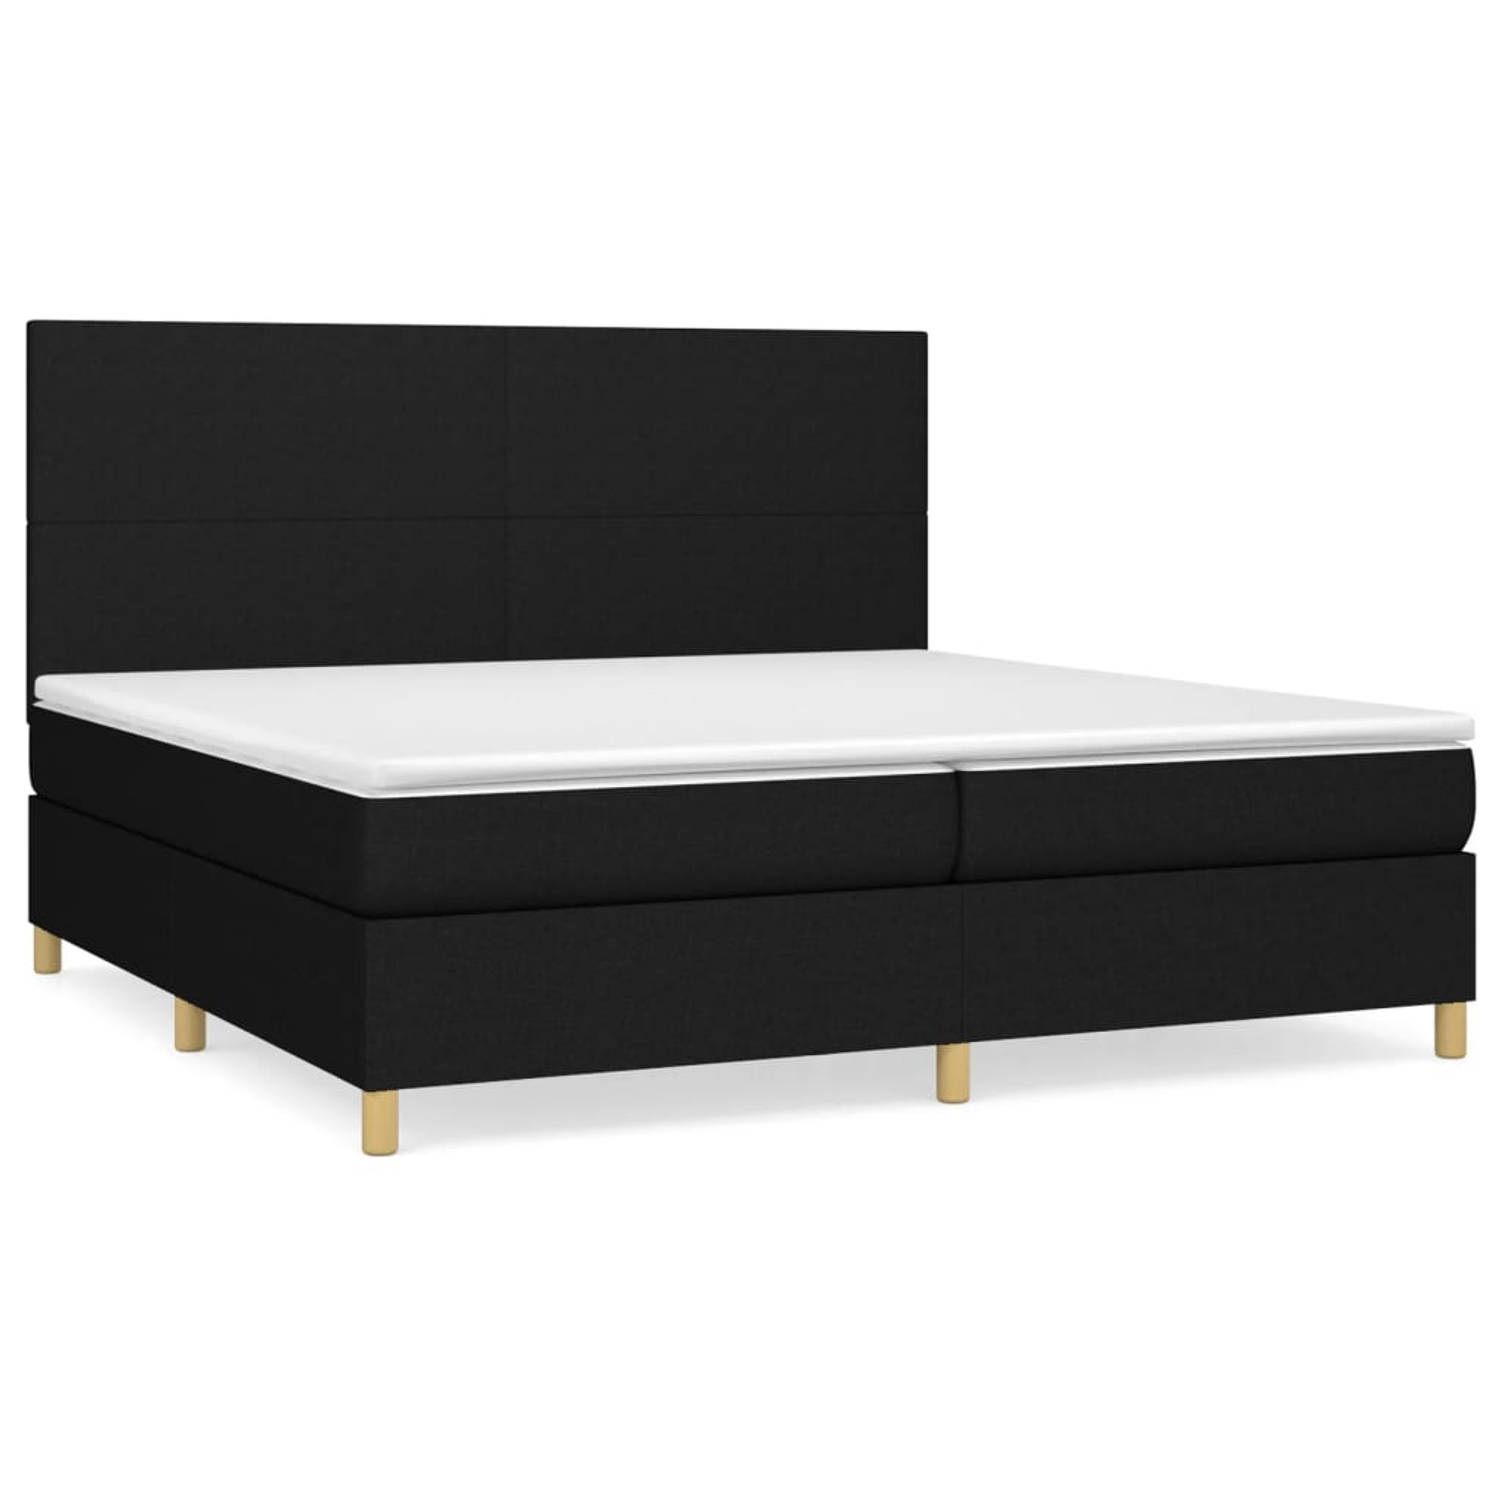 The Living Store Boxspringbed - Comfort - Bed - 203 x 200 x 118/128 cm - Zwart